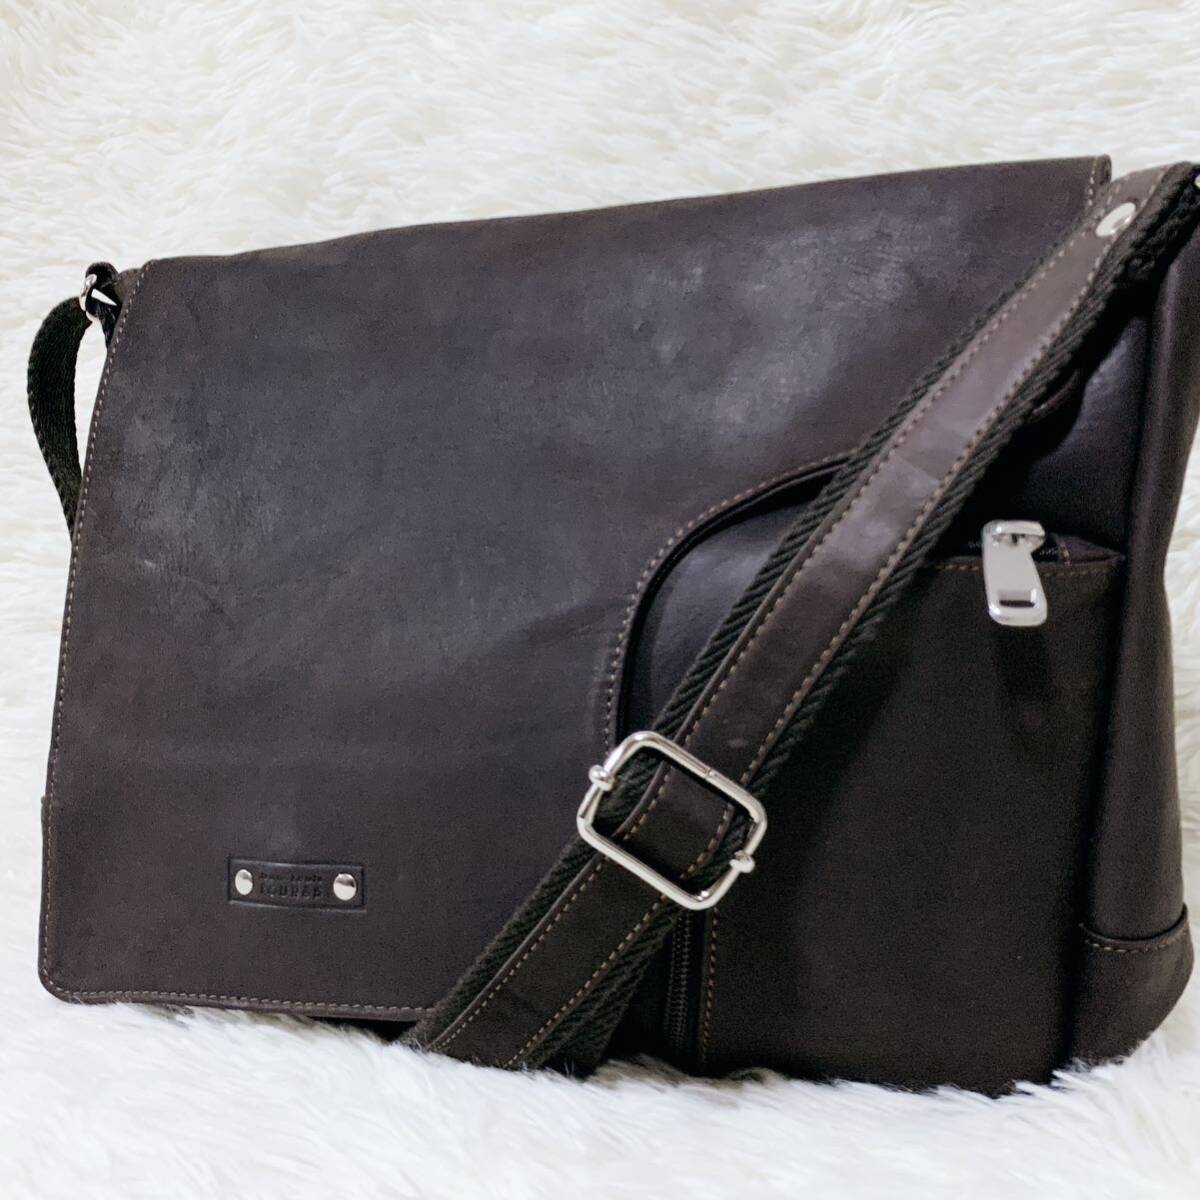  beautiful goods * high class . cow leather *Jean Louis Foures genre ifre Cross body shoulder bag A4 storage possibility men's lady's unisex 